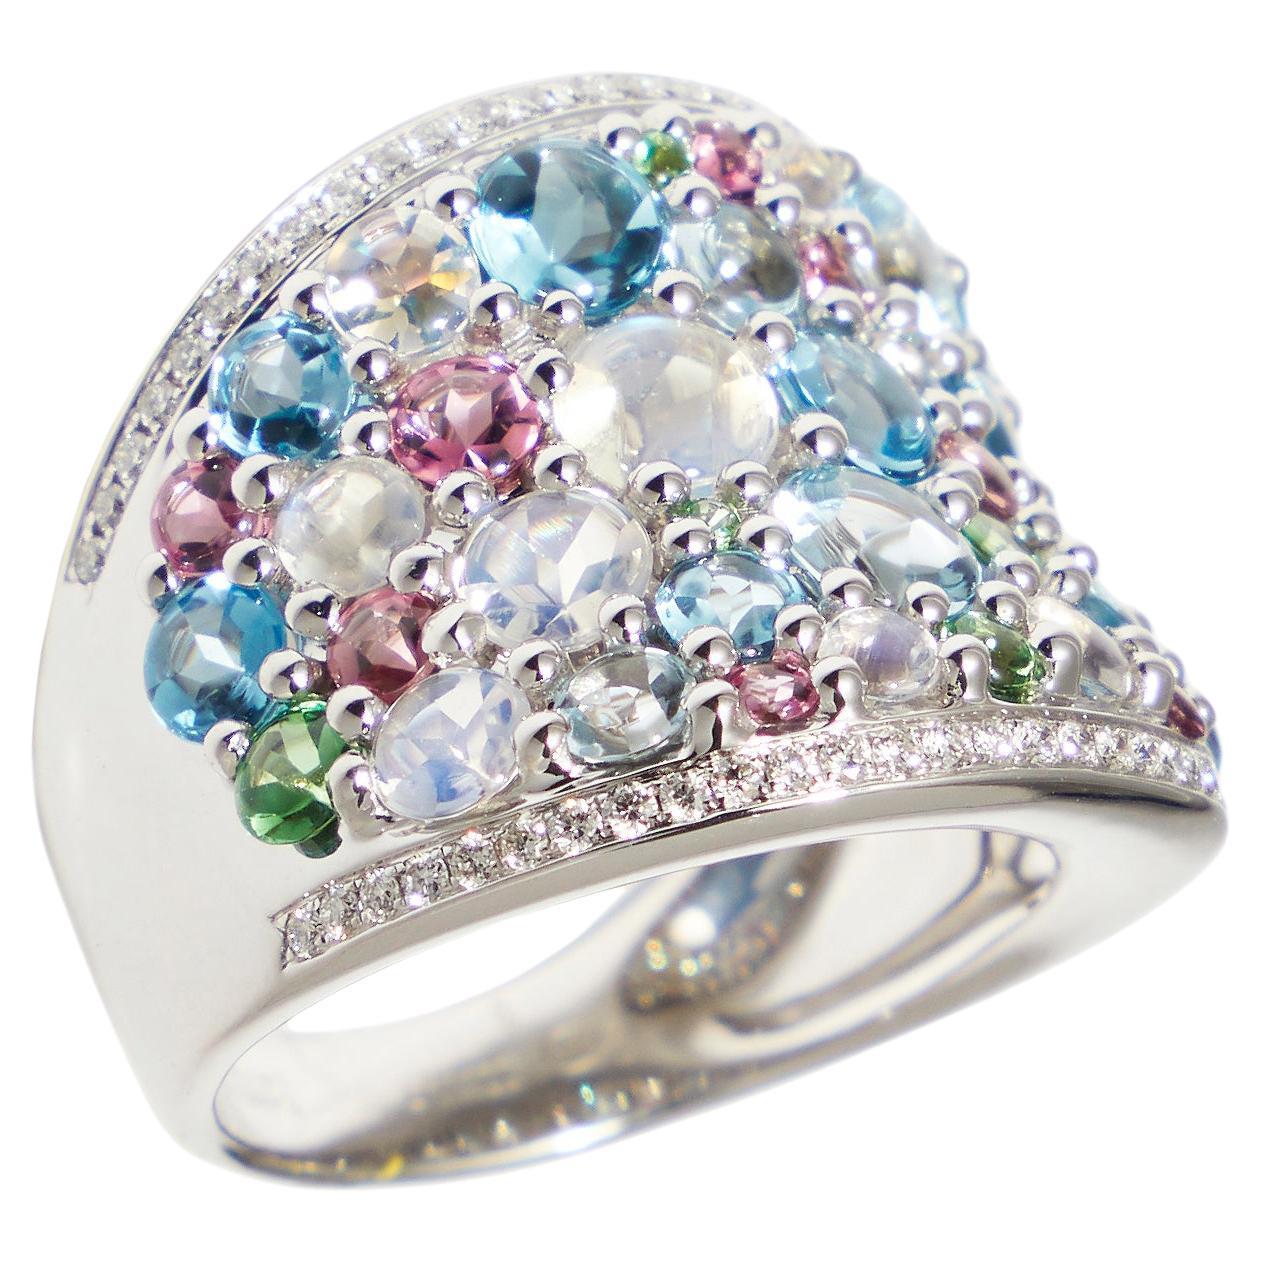 18 karat mixed gem ring with pink blue and rainbow moonstones For Sale